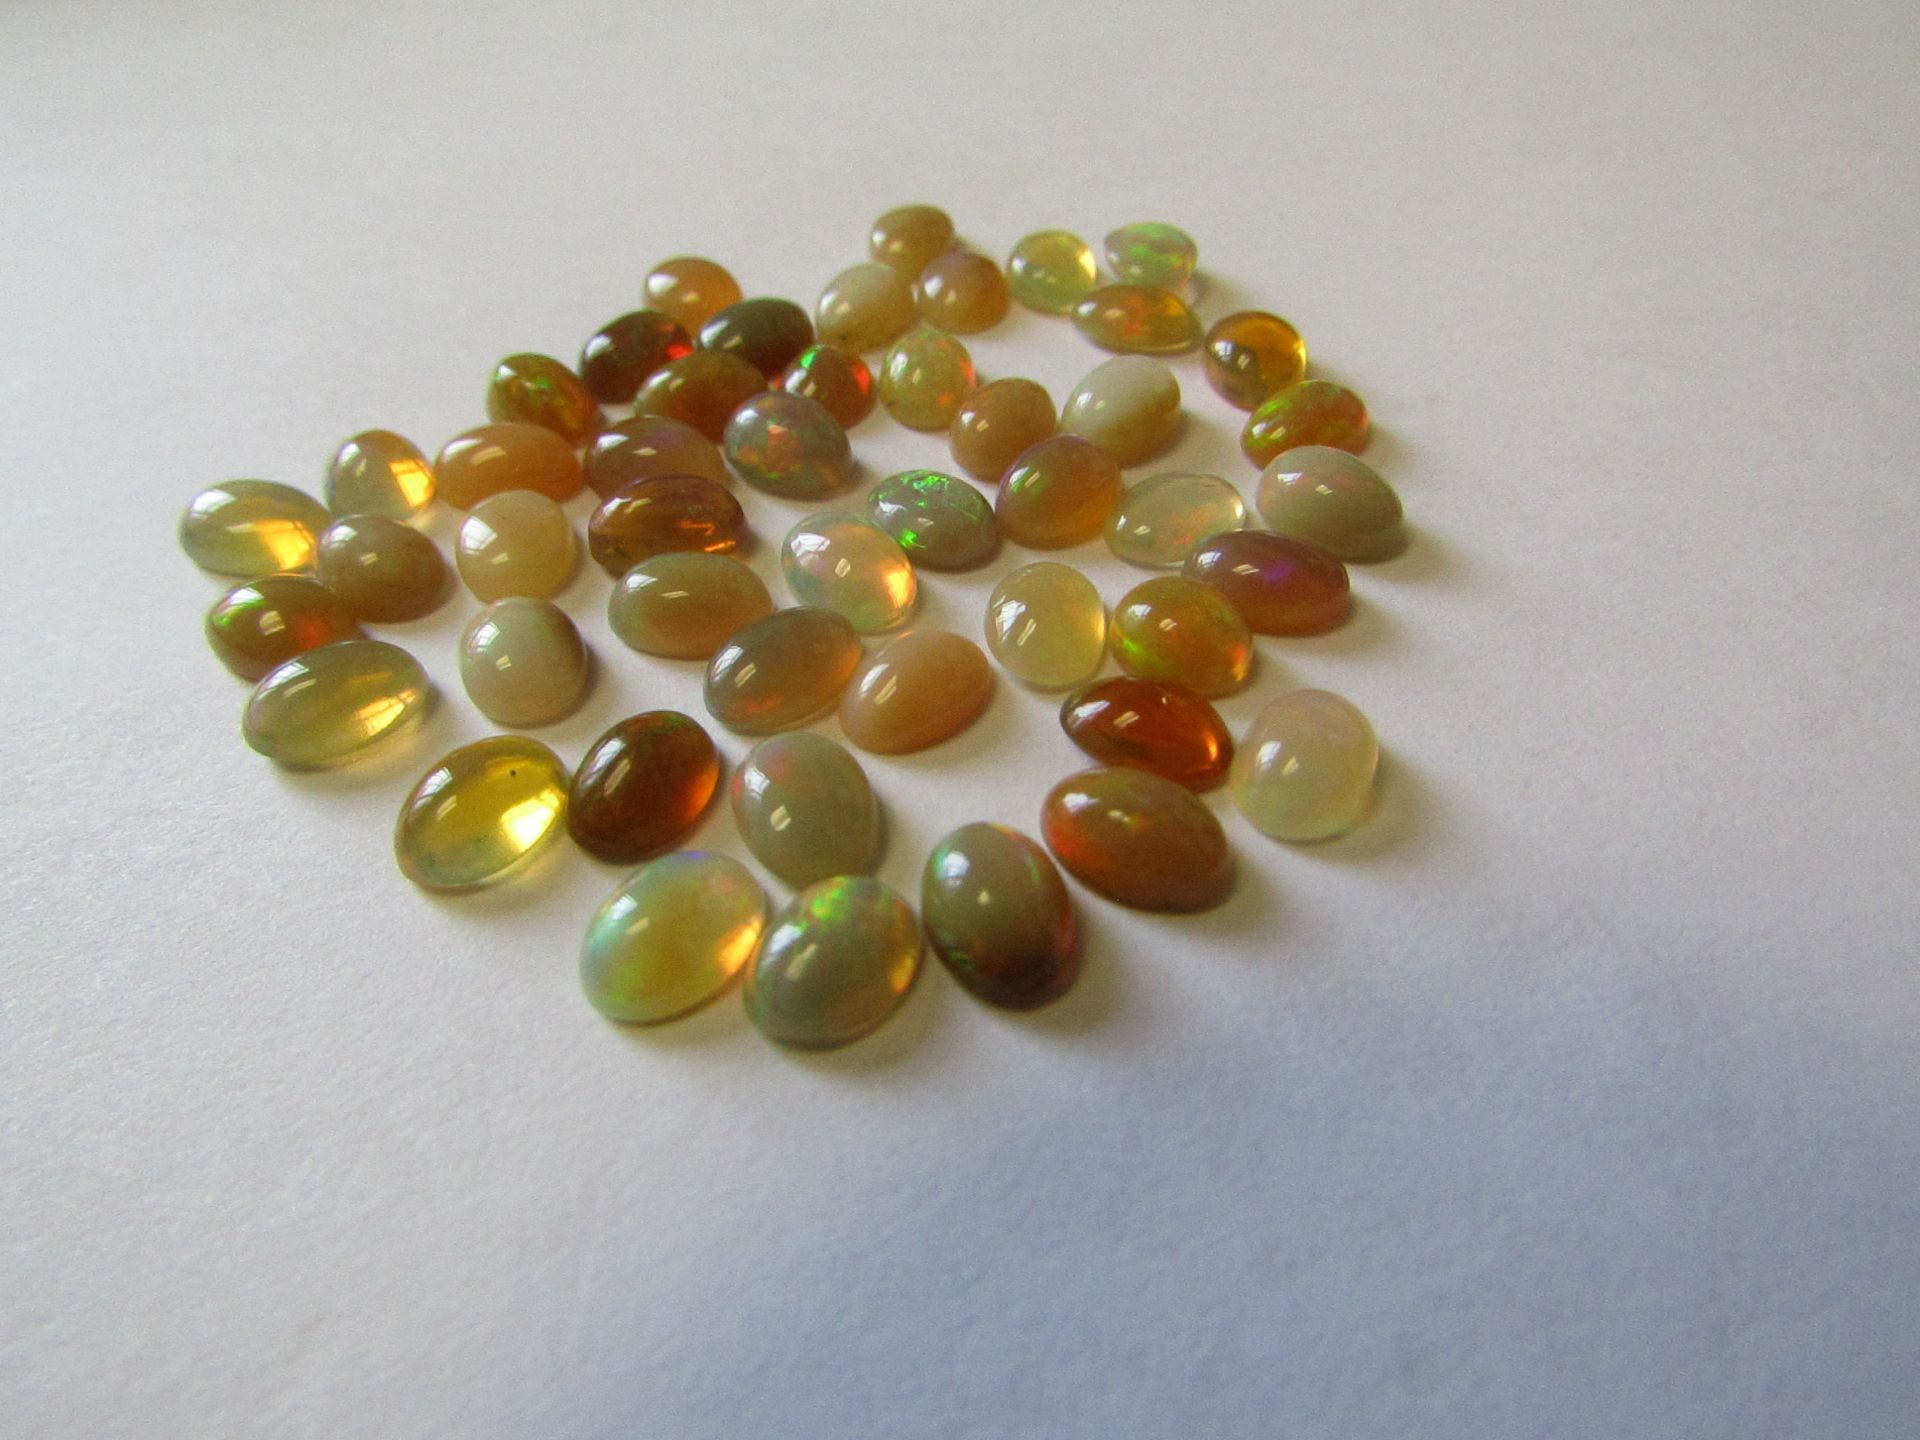 Wow! An amazing collection of Natural Ethiopia Opal Gemstones, 23.70 carat, 48 pieces. these amazing